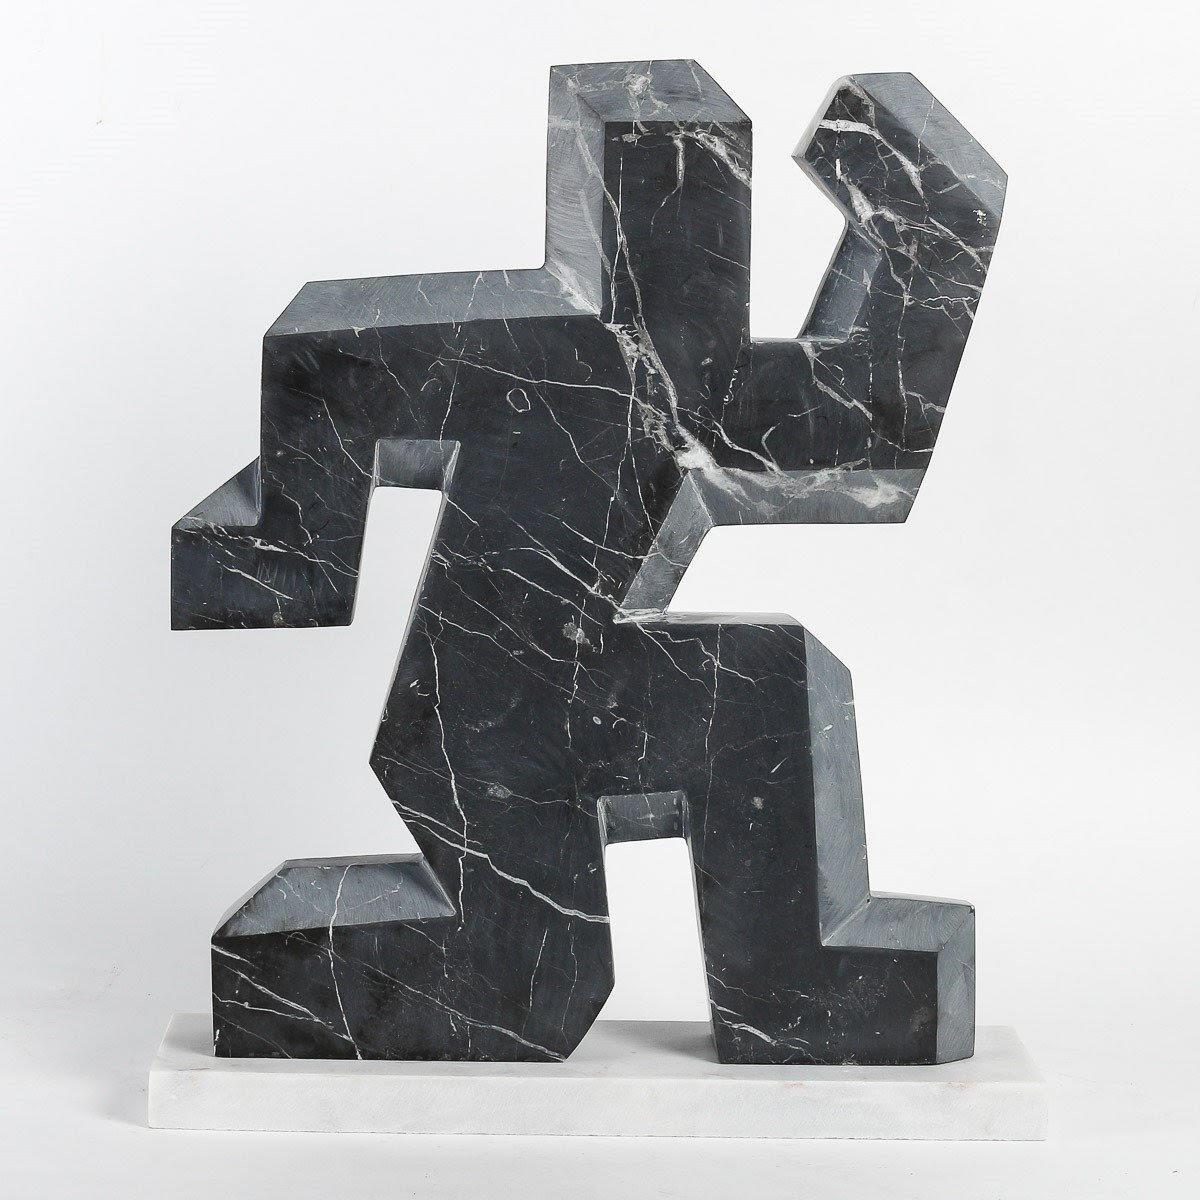 Contemporary Marble Sculpture by Artist François Fernandez, known as SAVY, Circa 2001.

Marble sculpture by the artist François Fernandez, known as Savy, signed SAVY and dated 2001.

h: 60cm, w: 40cm, d: 10cm